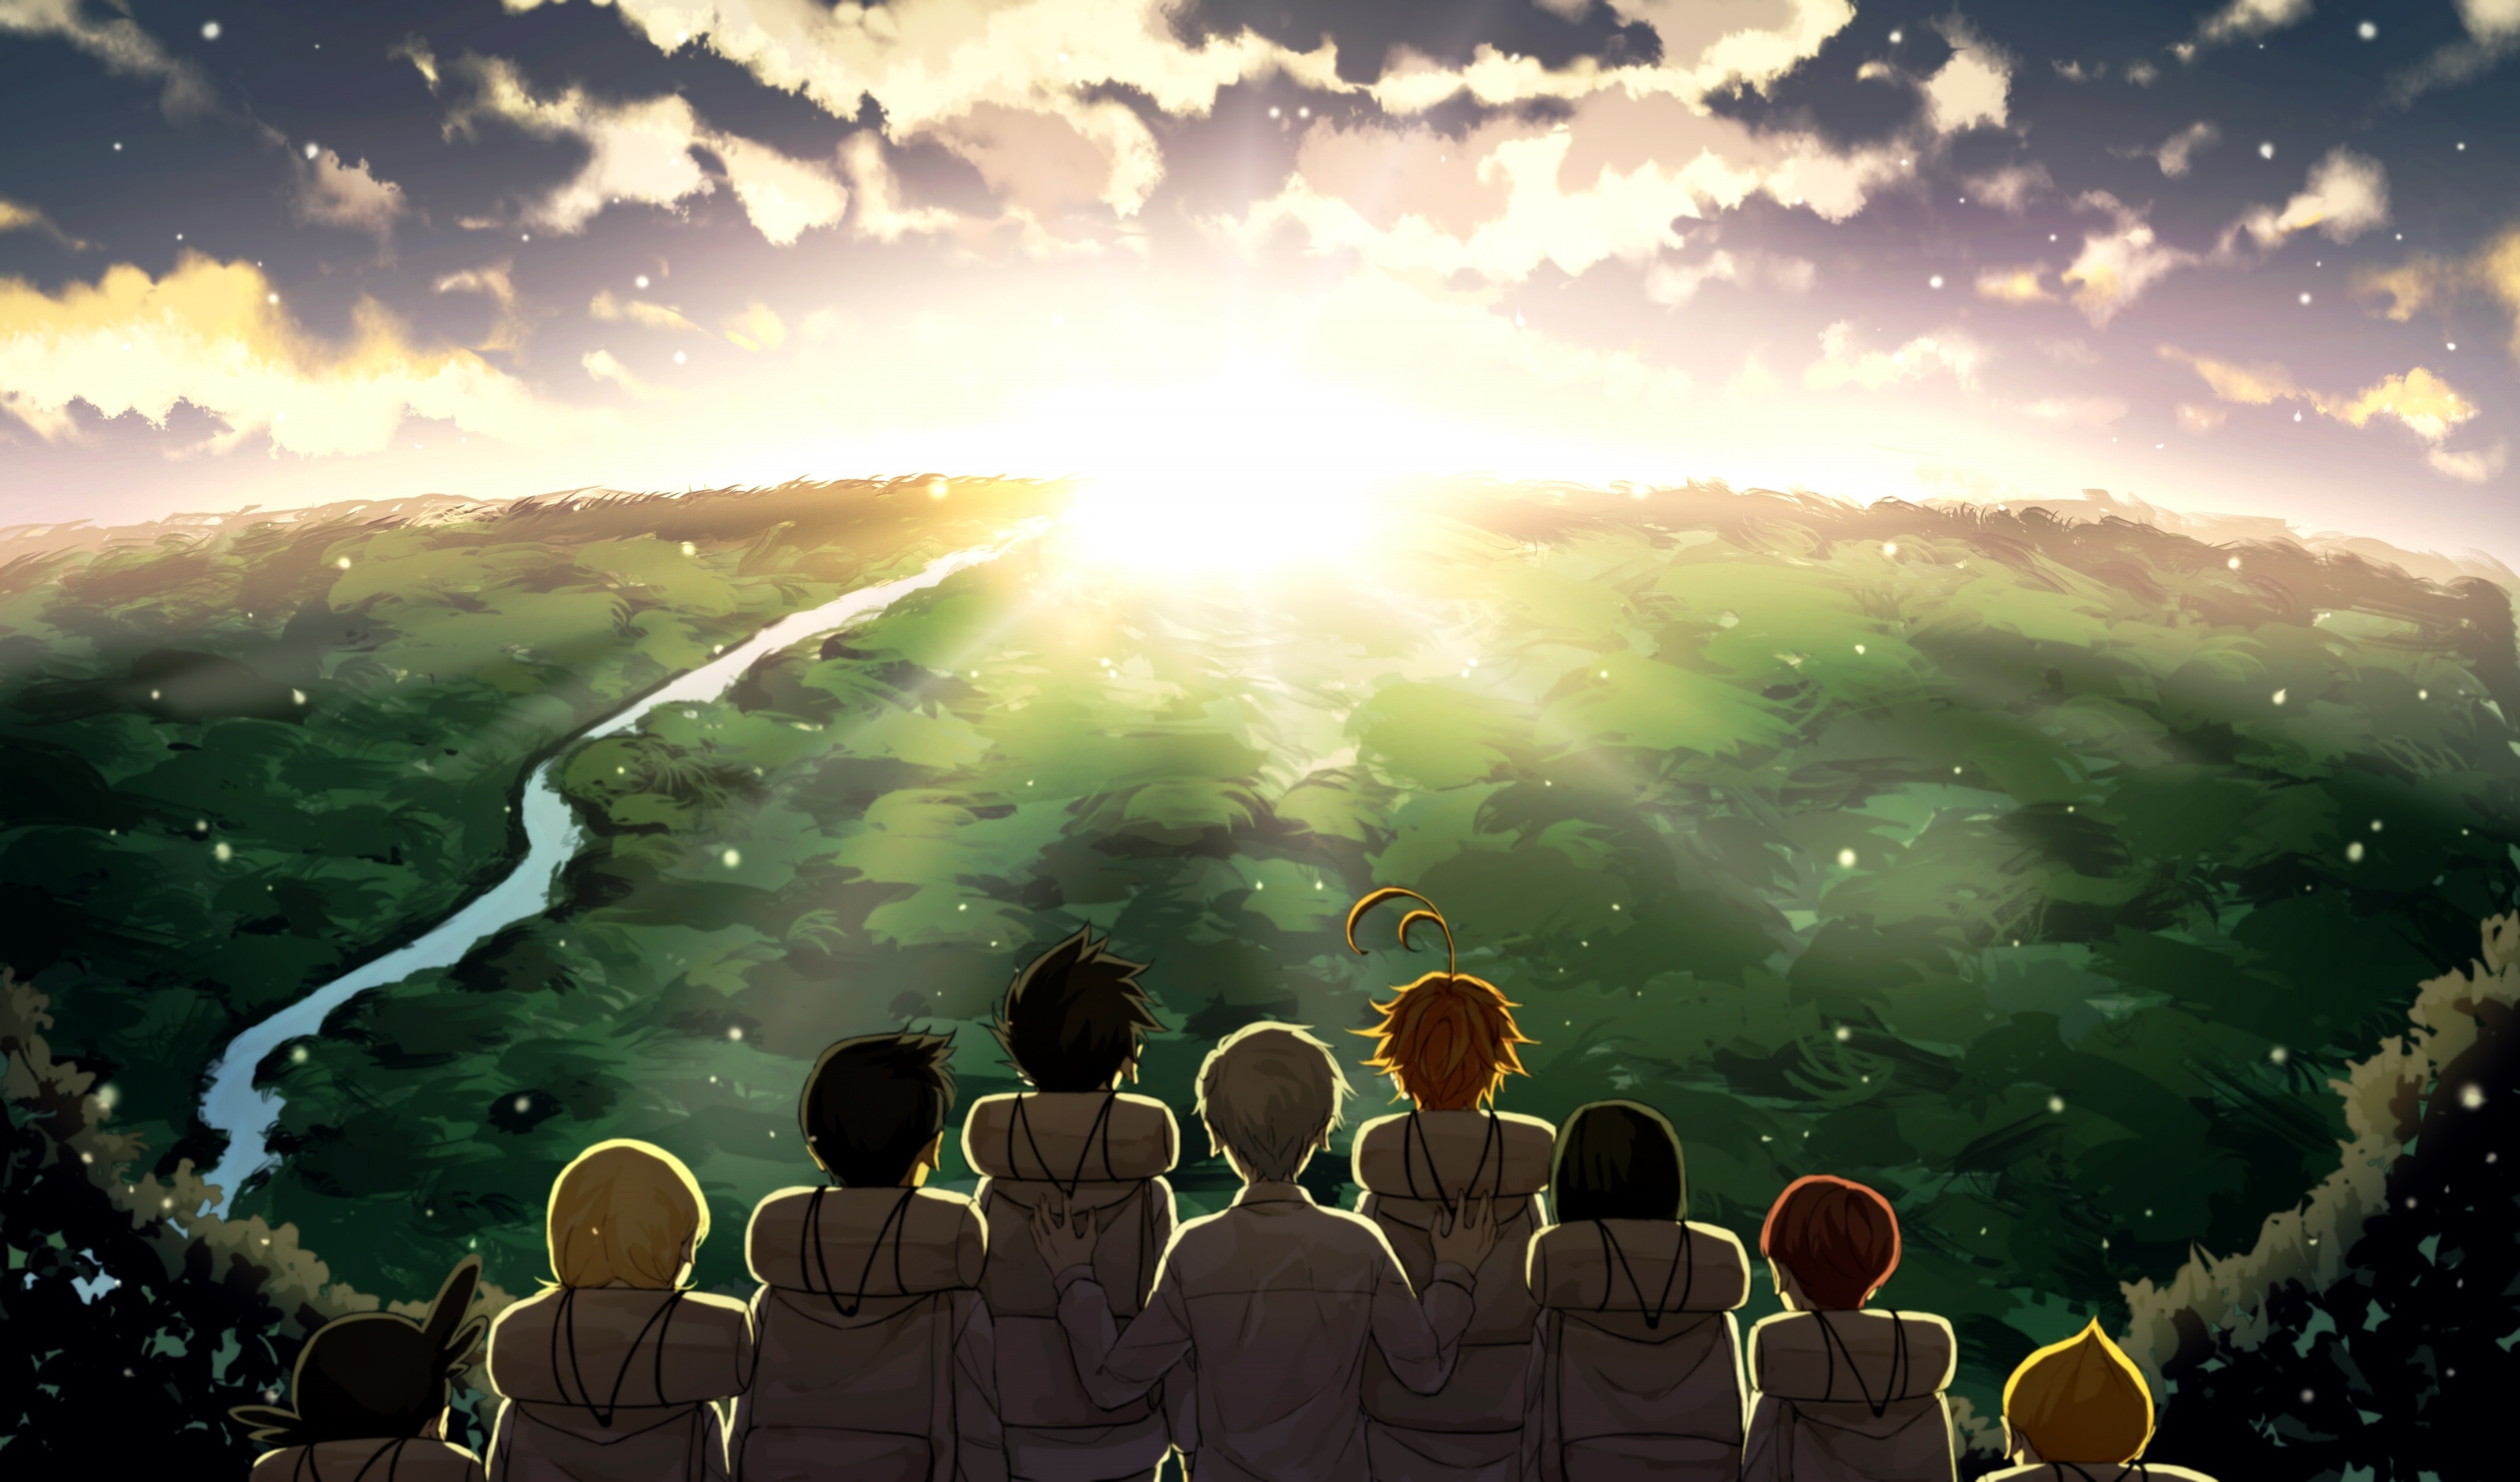 3188x1875 90+ The Promised Neverland HD Wallpapers and Backgrounds